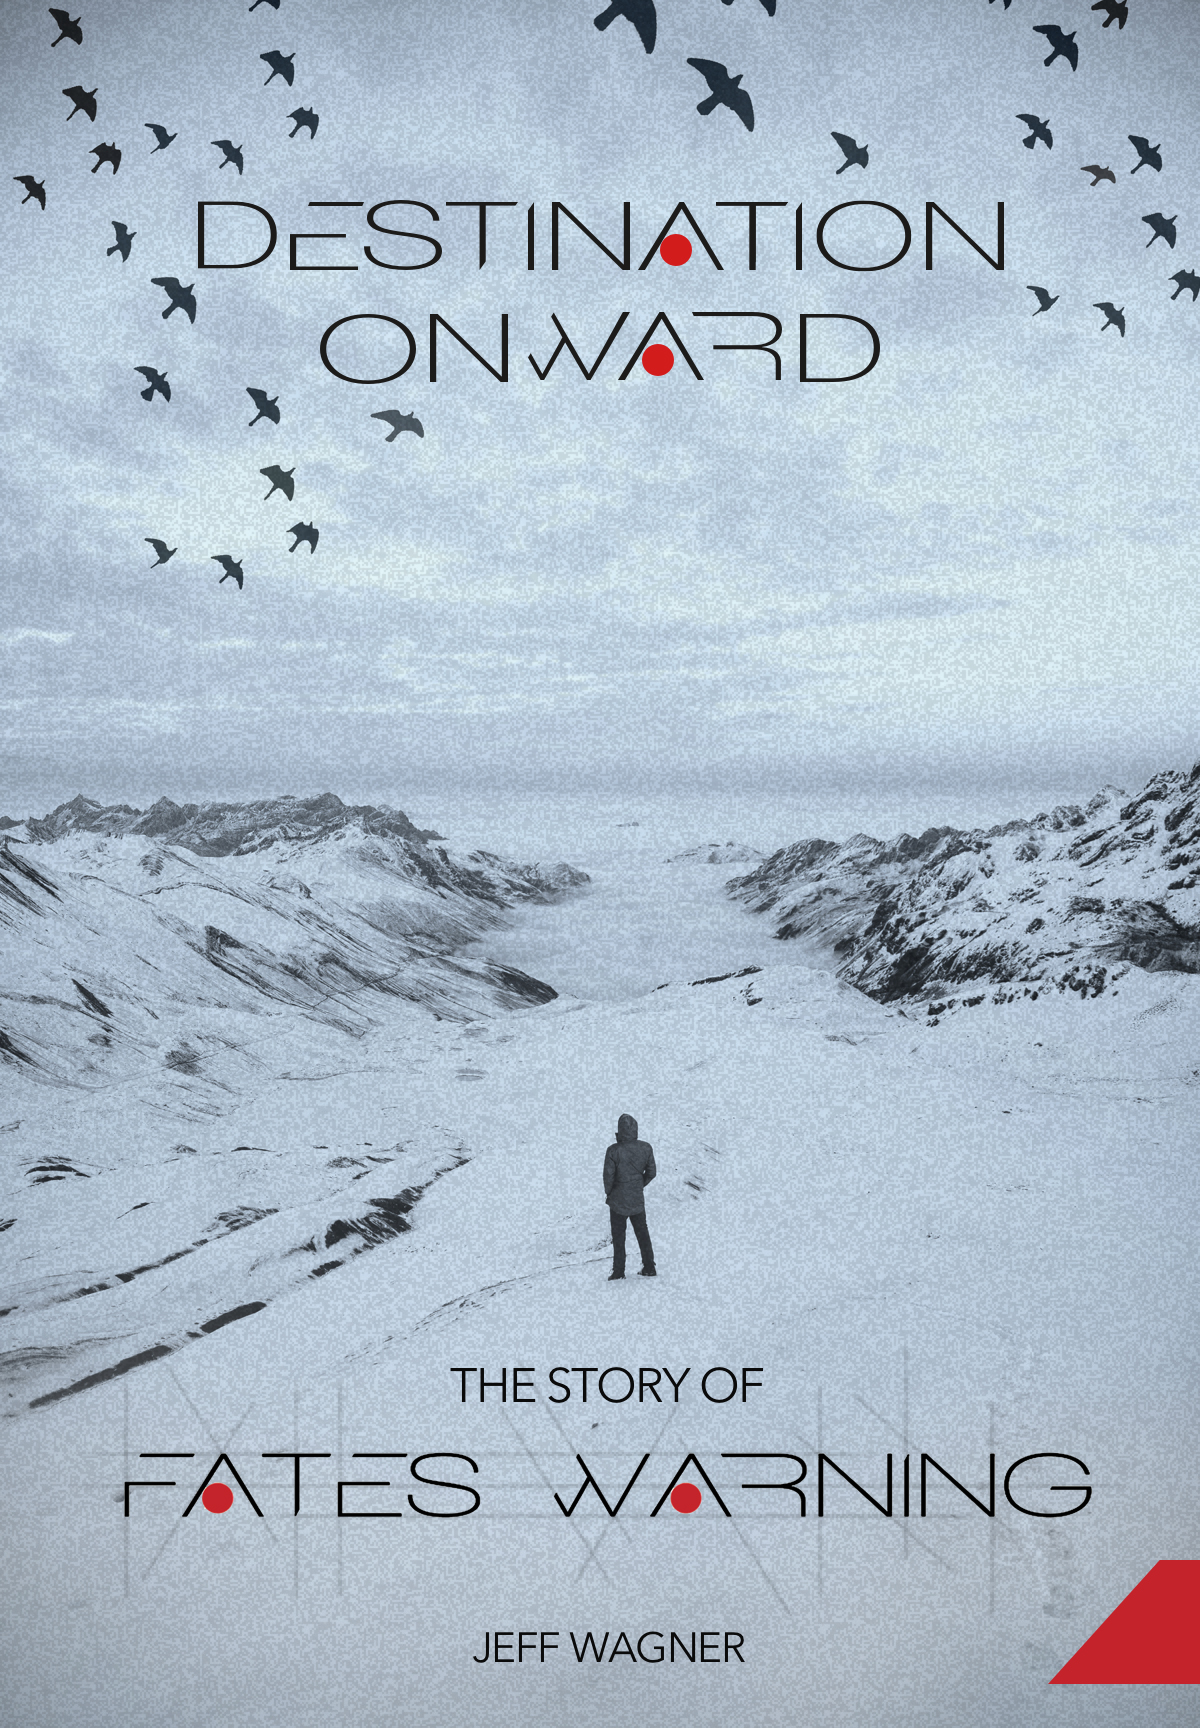 Book review – Destination Onward: The Story of Fates Warning by Jeff Wagner